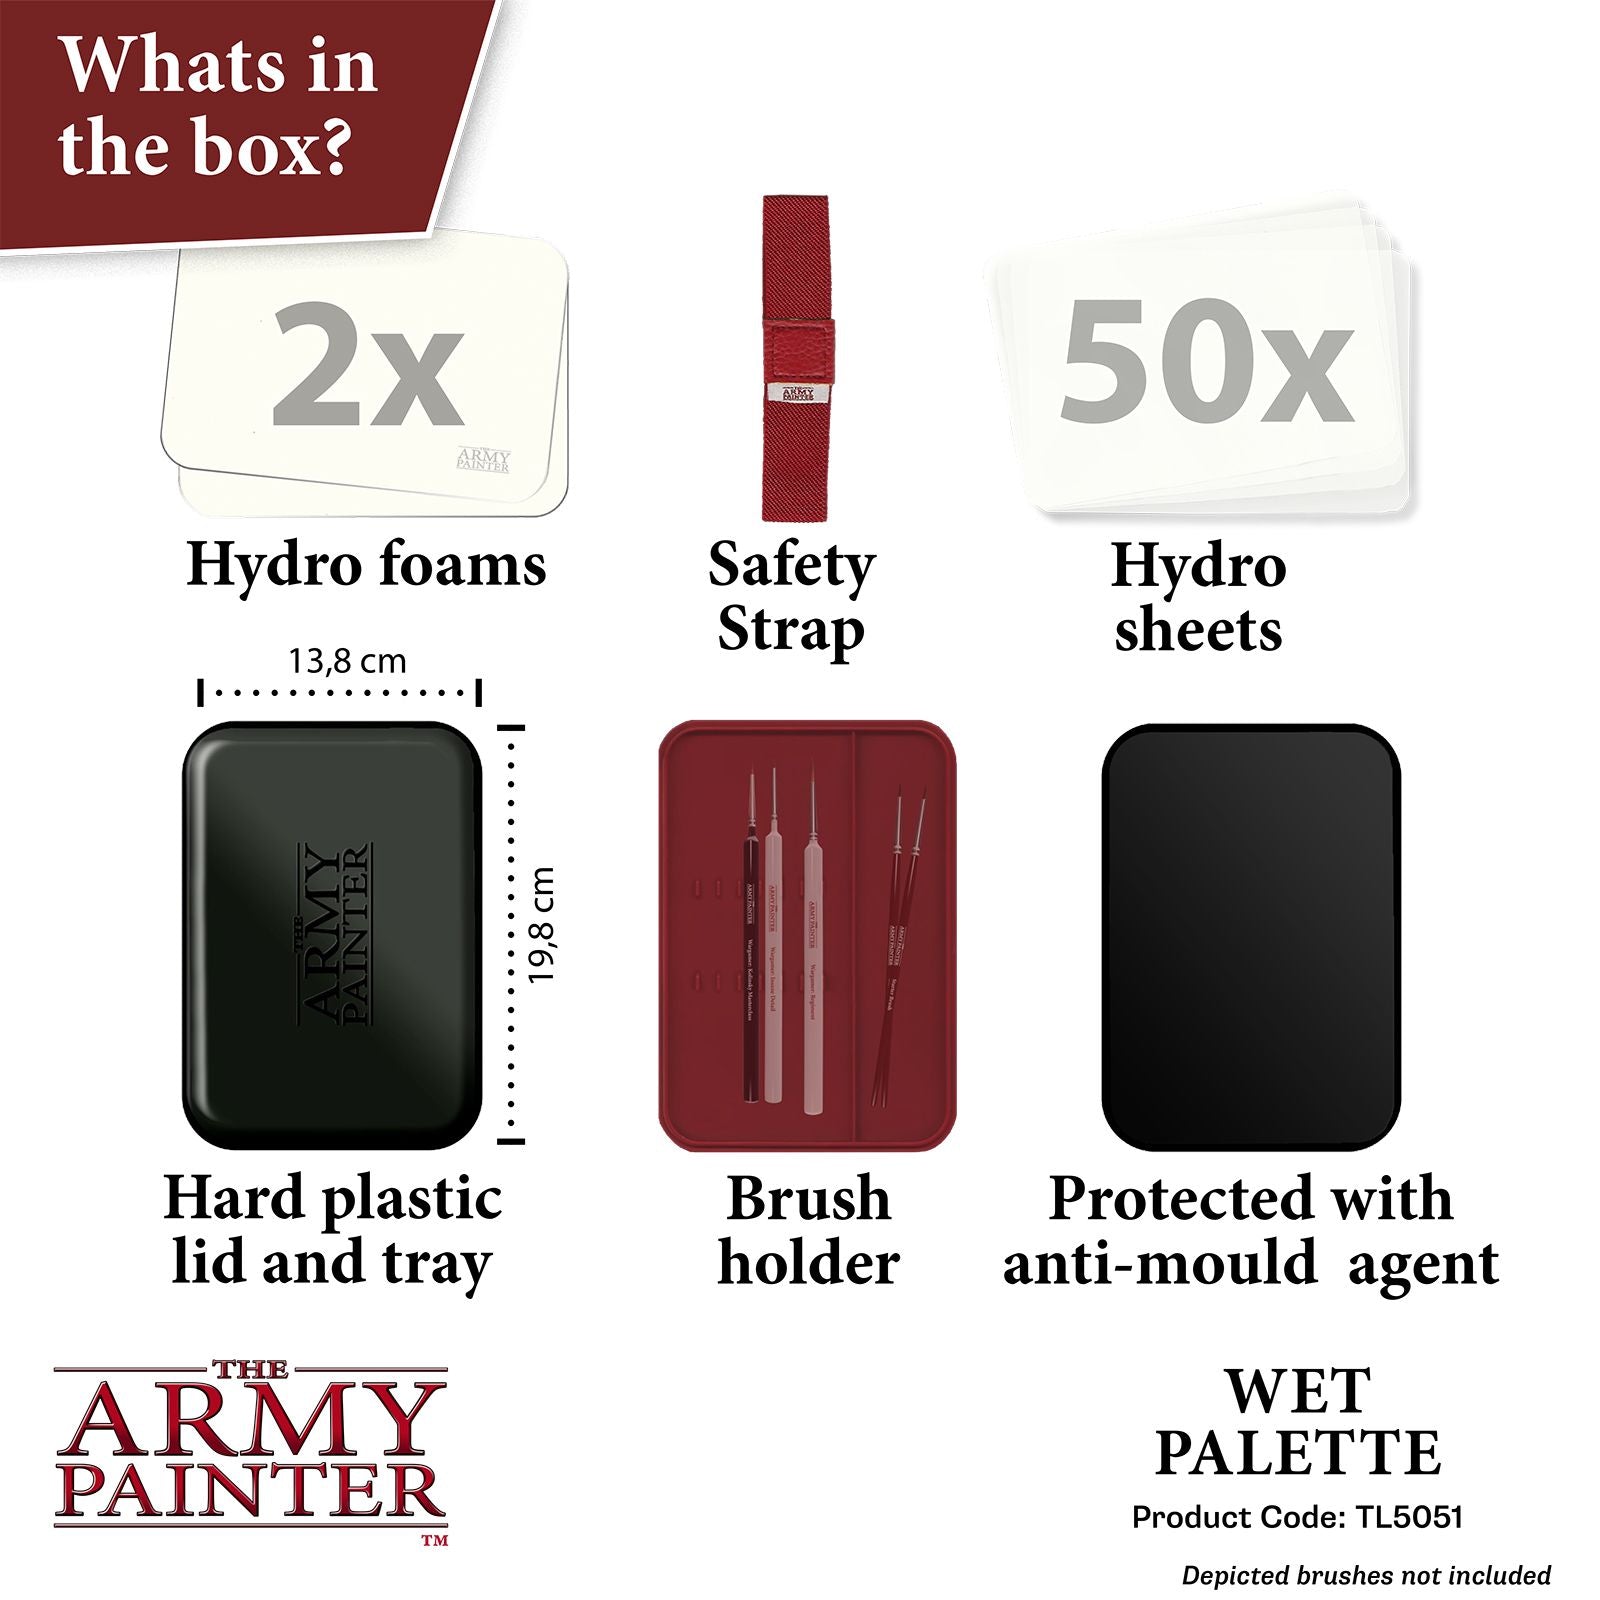 The Army Painter™ Wet Palette